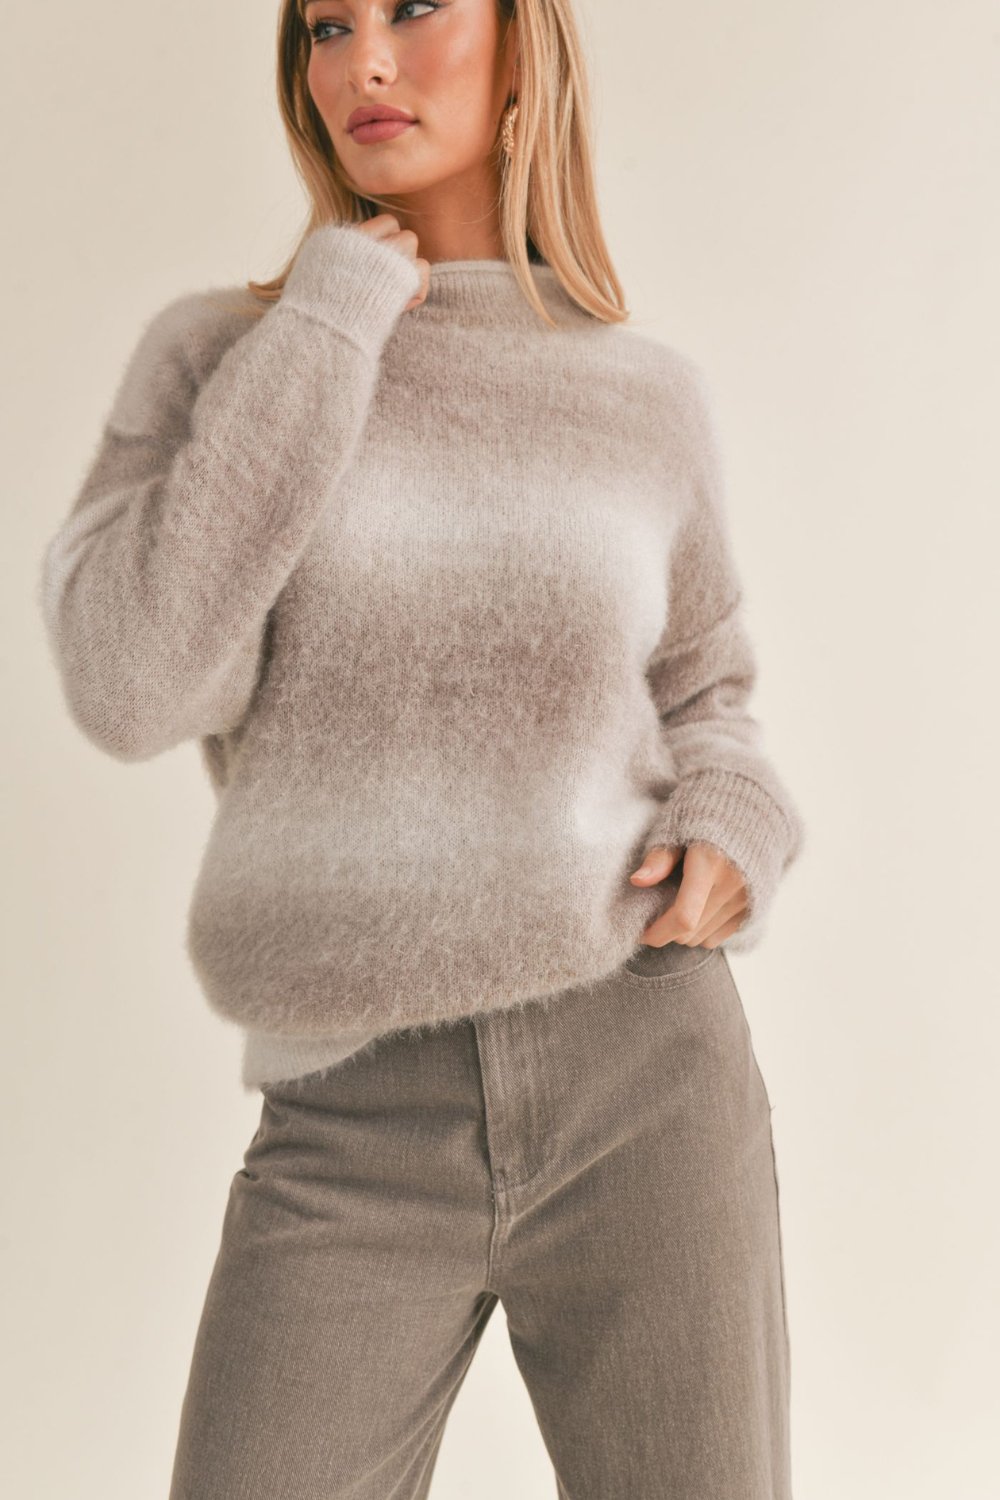 Women's Ombre Knit Sweater | Relaxed Fit | Taupe Multi - Women's Sweaters - Blooming Daily